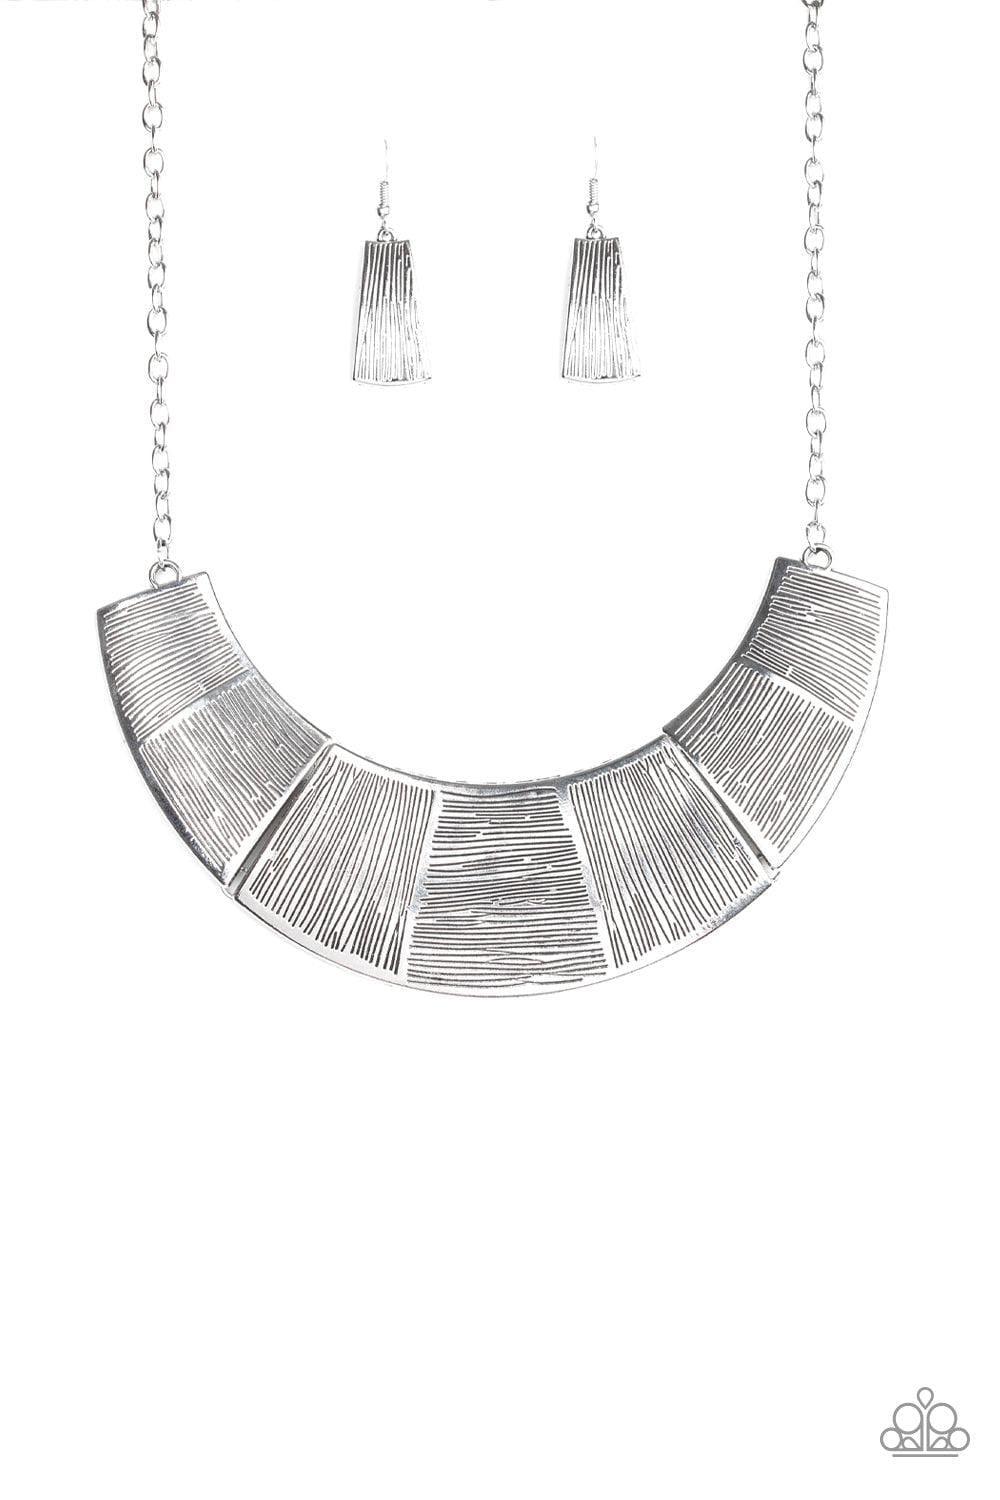 Paparazzi Accessories - More Roar - Silver Necklace - Bling by JessieK